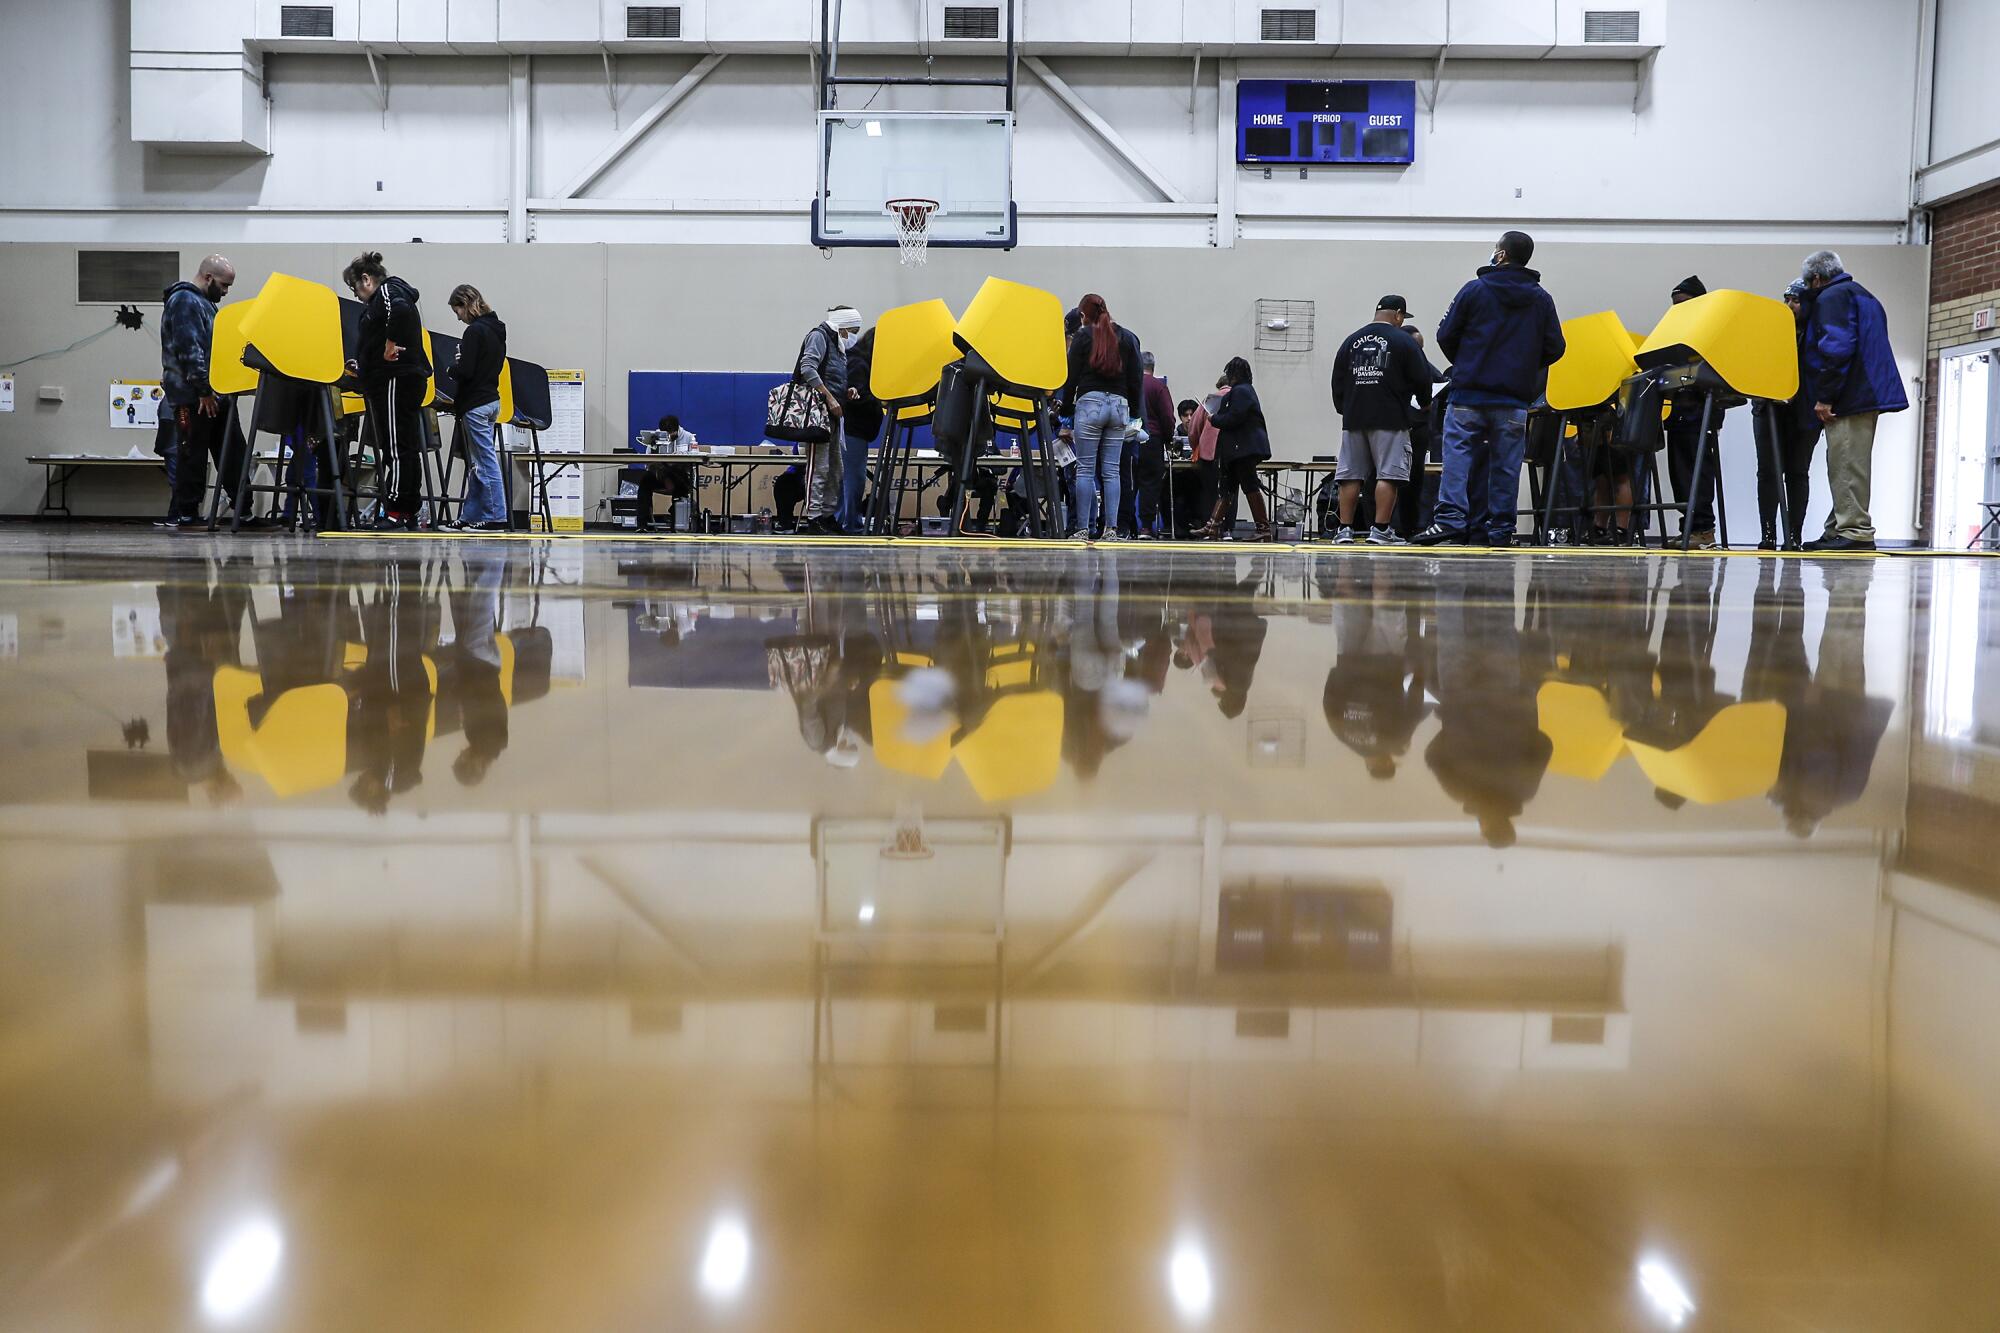 People stand at yellow voting booths in a basketball gym